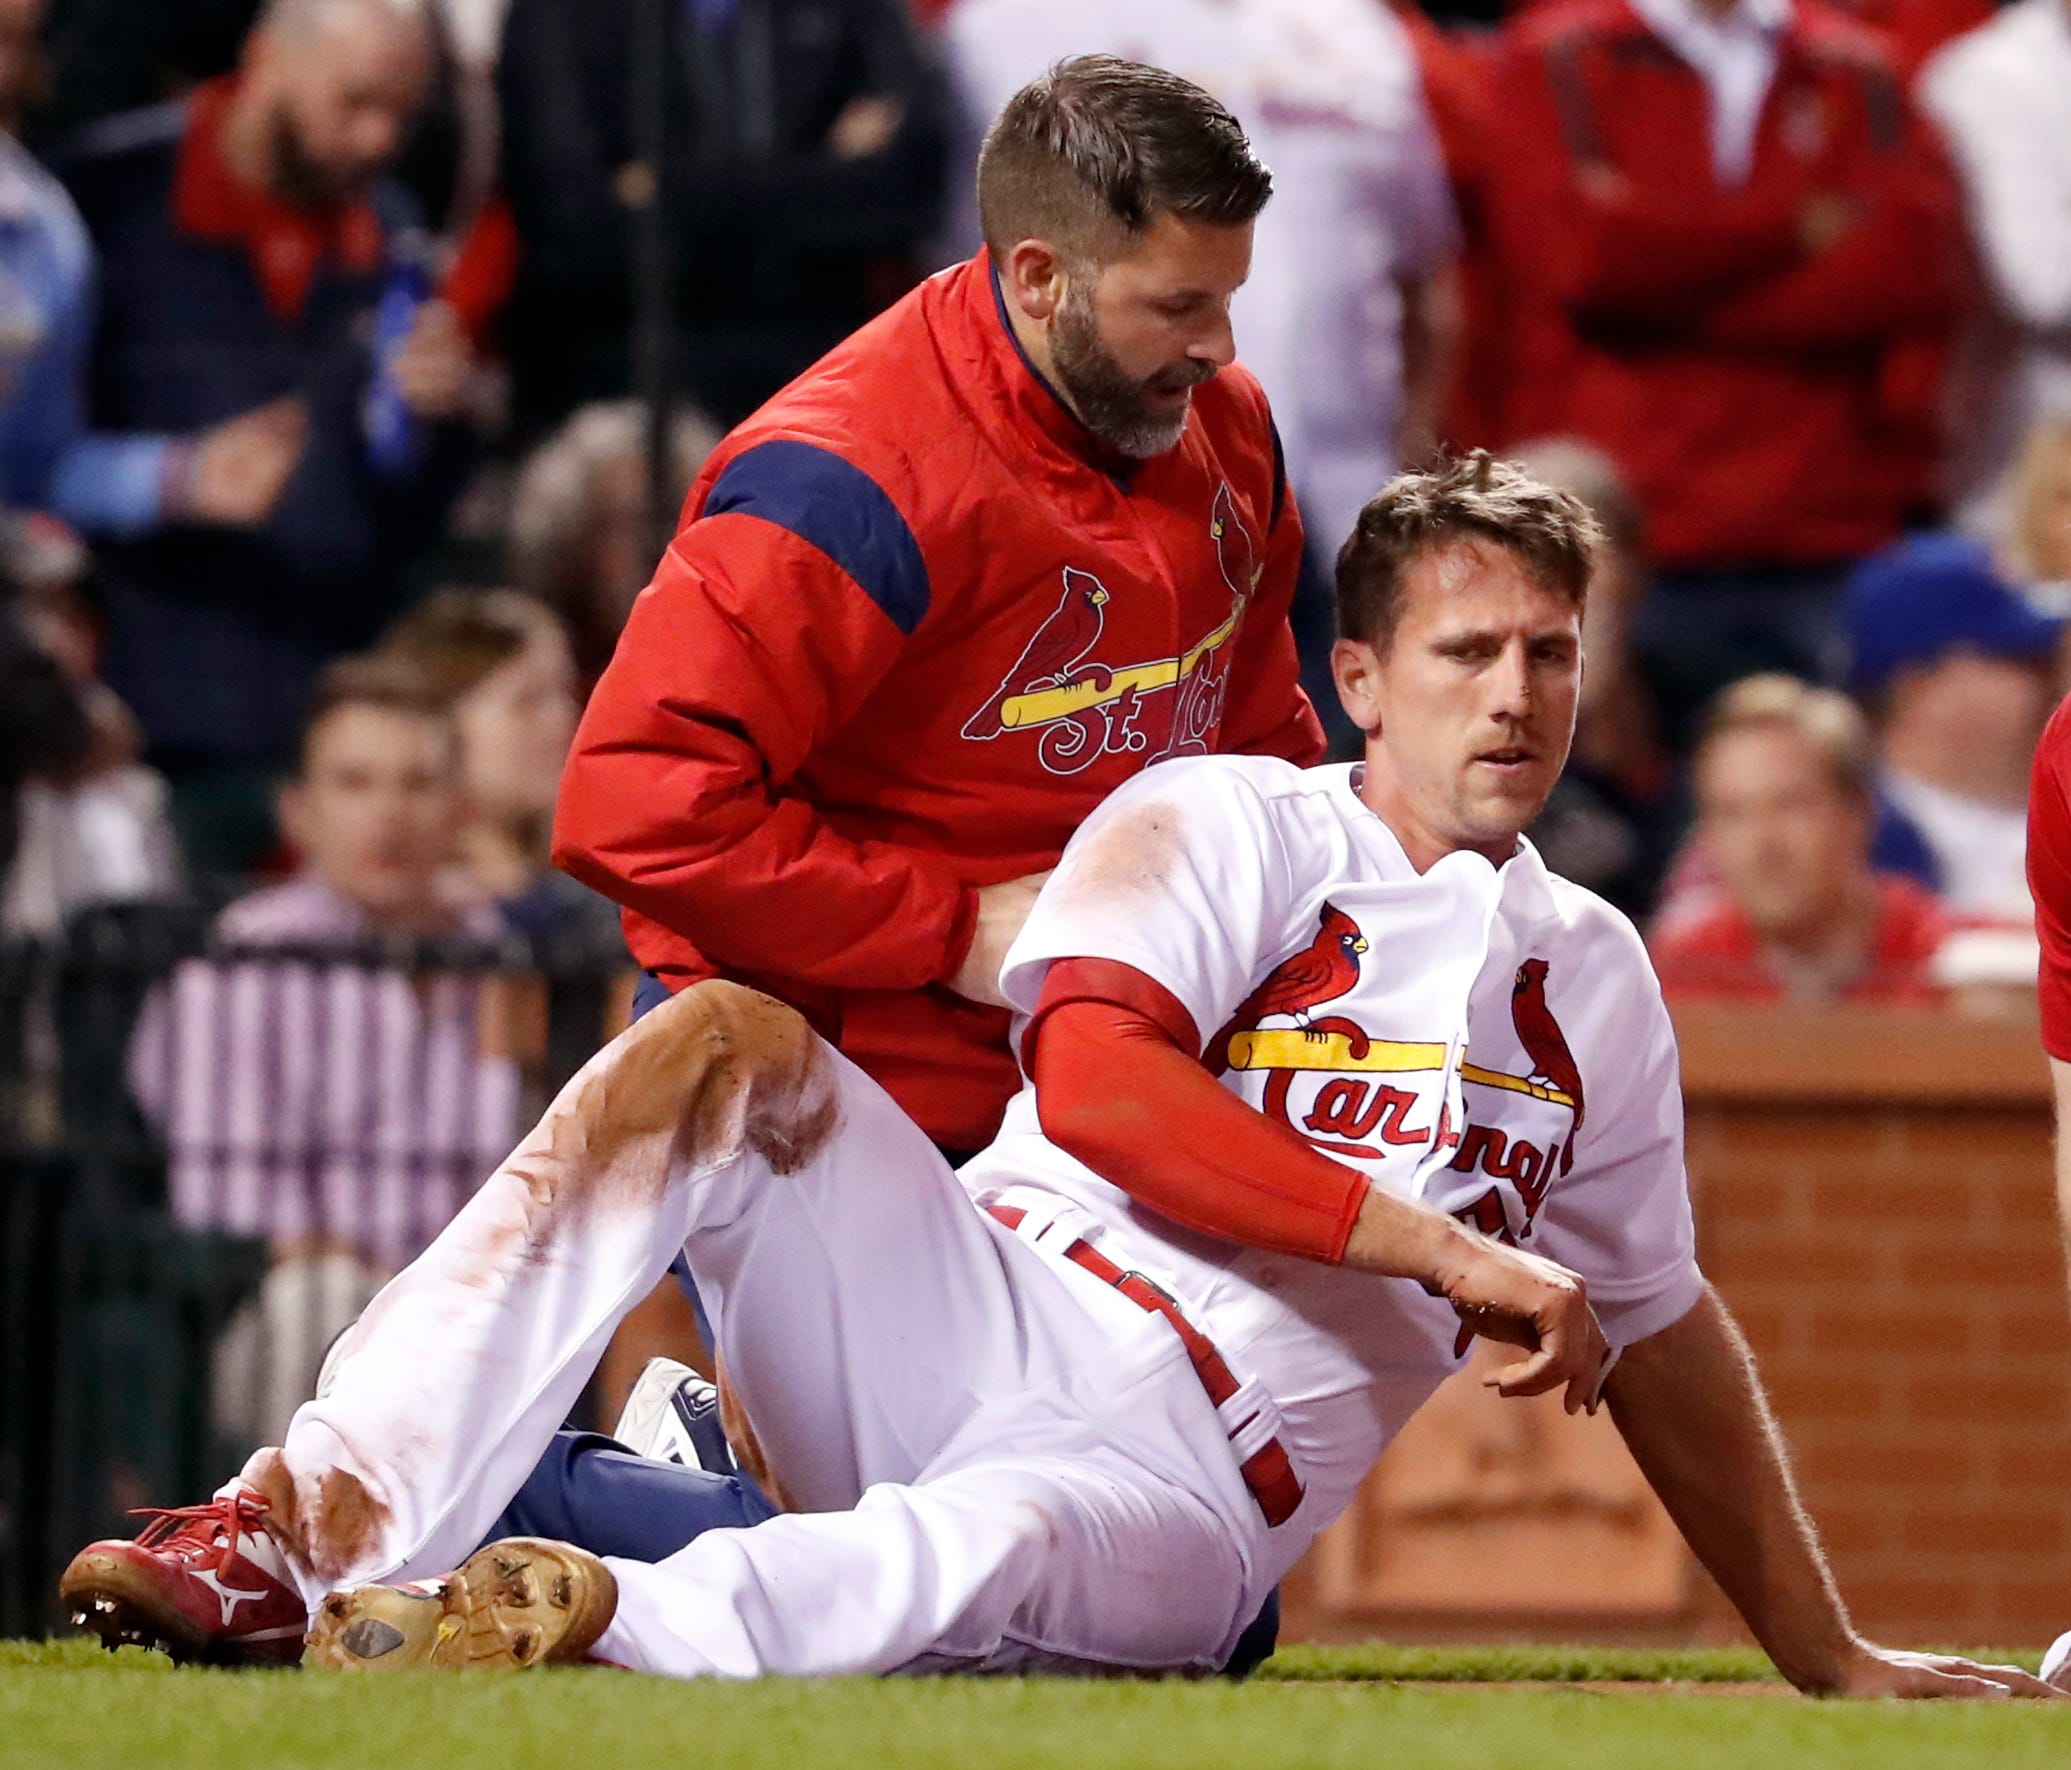 Stephen Piscotty, front, is helped by a trainer after being hit in the head with a ball while scoring during the fifth inning.